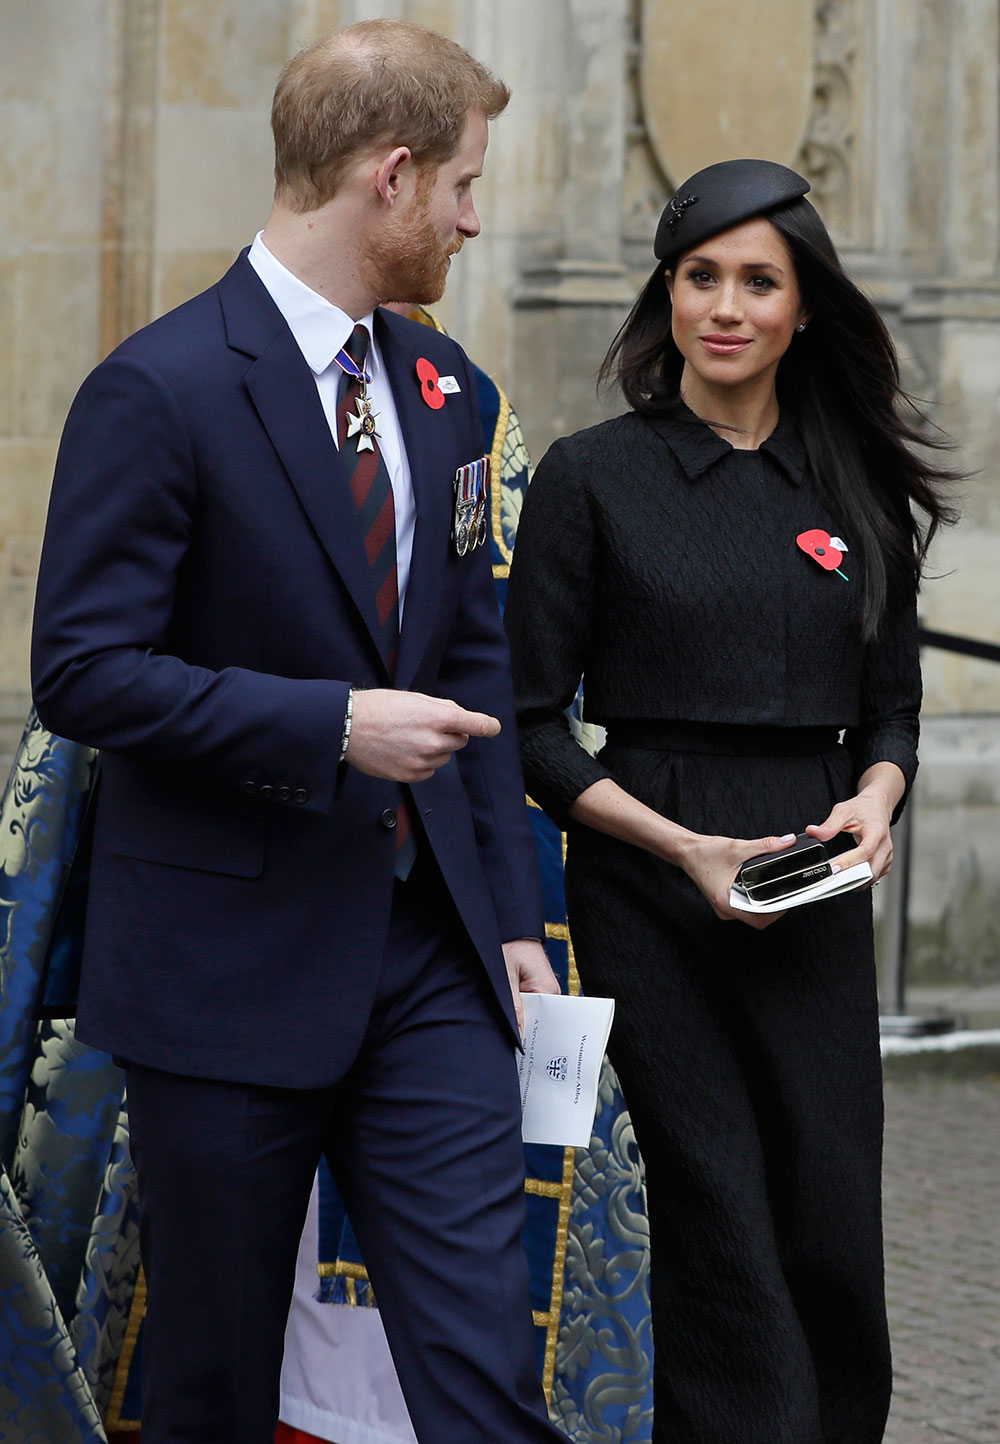 April 25, 2018: Meghan Markle wears a bespoke Emilia Wickstead skirt and jacket with a Philip Treacy hat for the ANZAC Day service at Westminster Abbey.